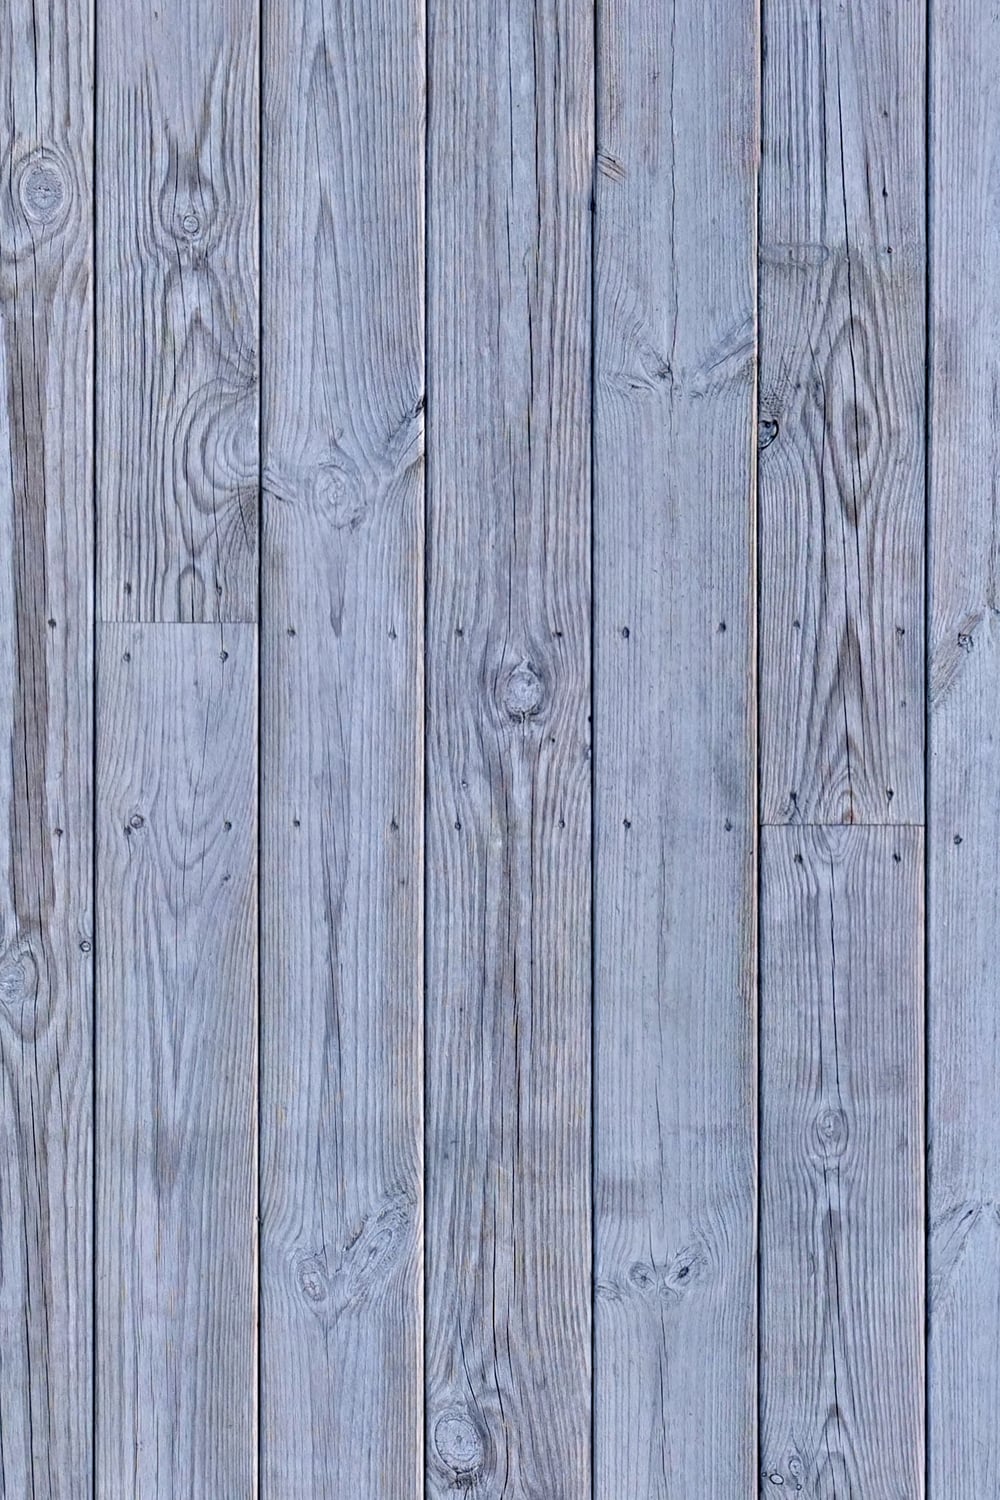 outdoor wooden planks - detail